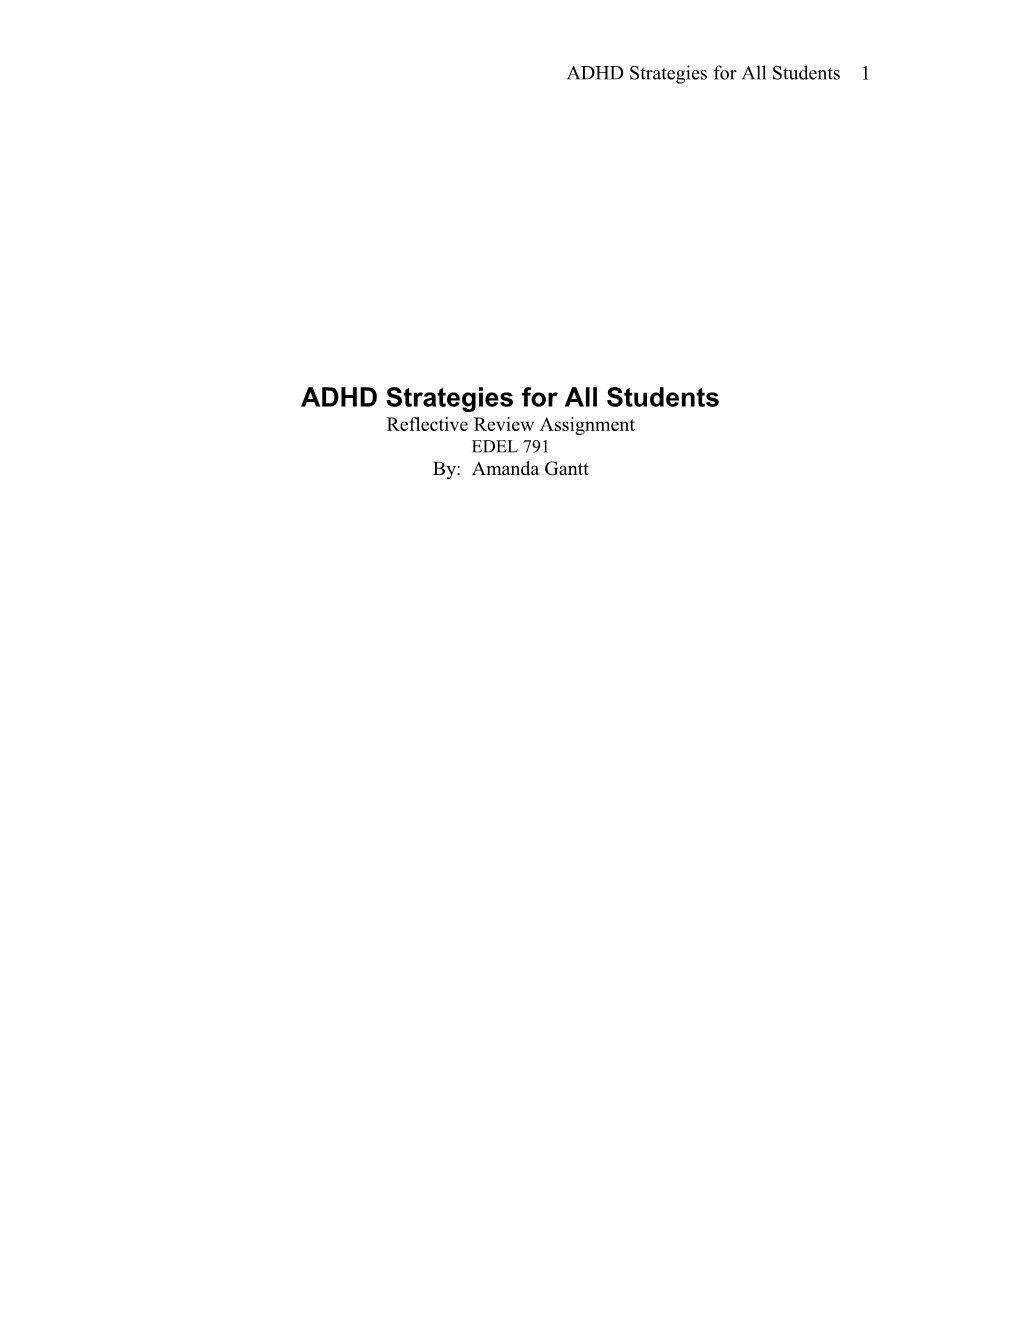 ADHD Strategies For All Students